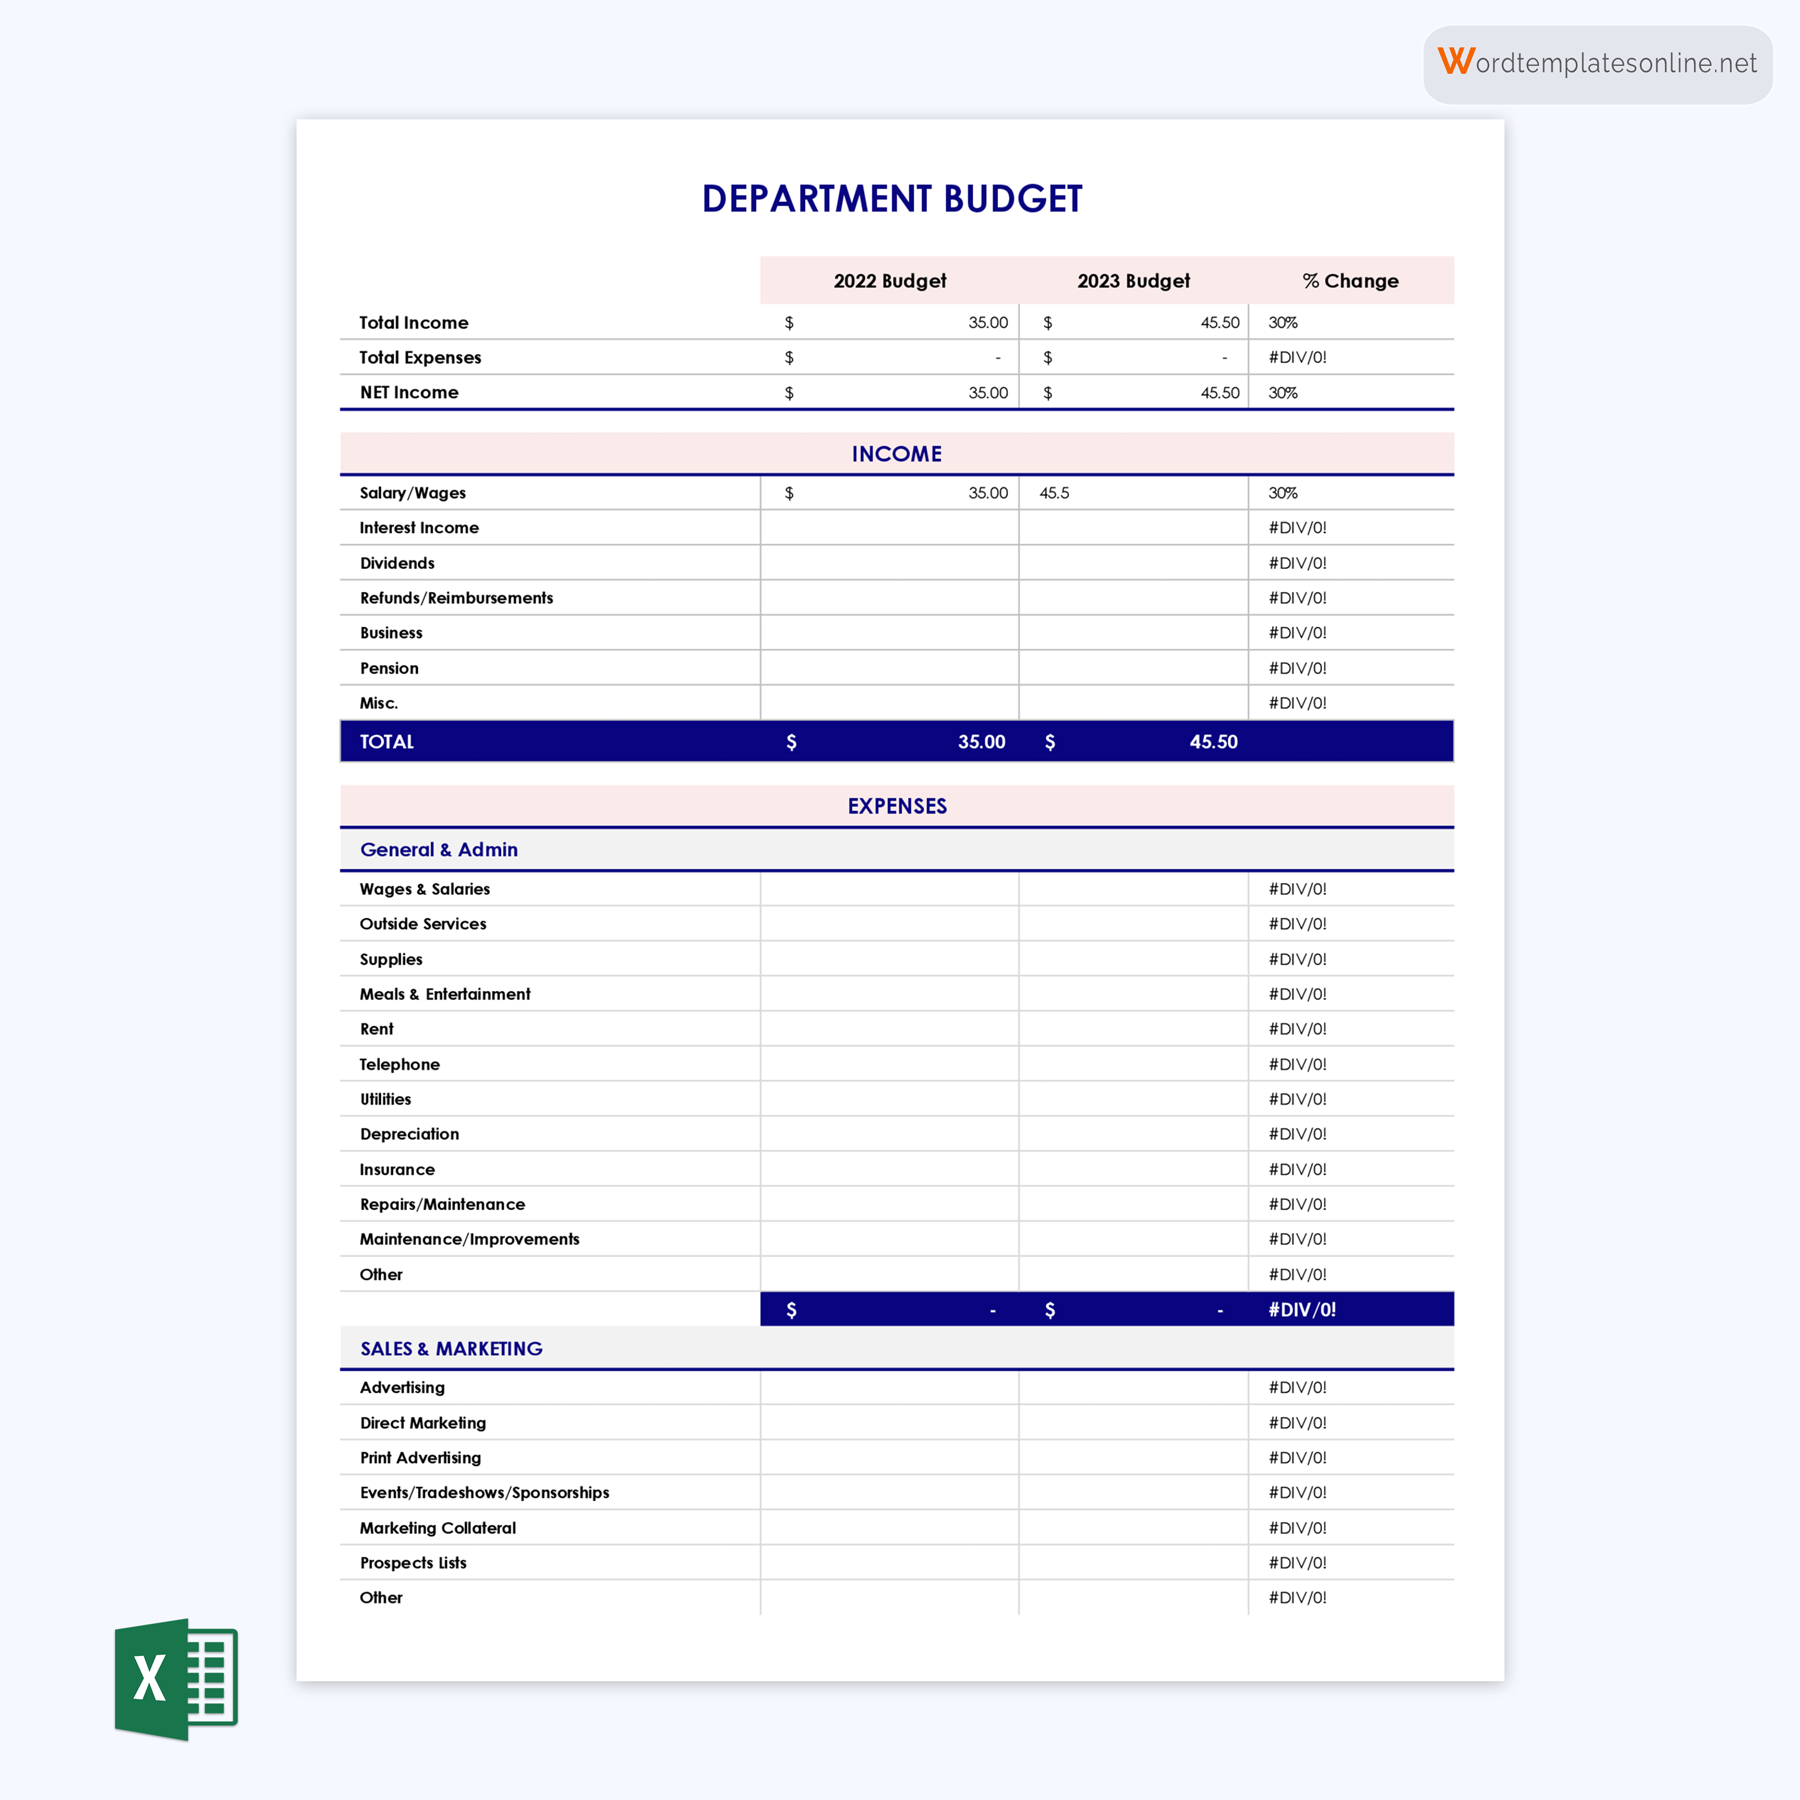 Free Department Budget Template Example in Excel